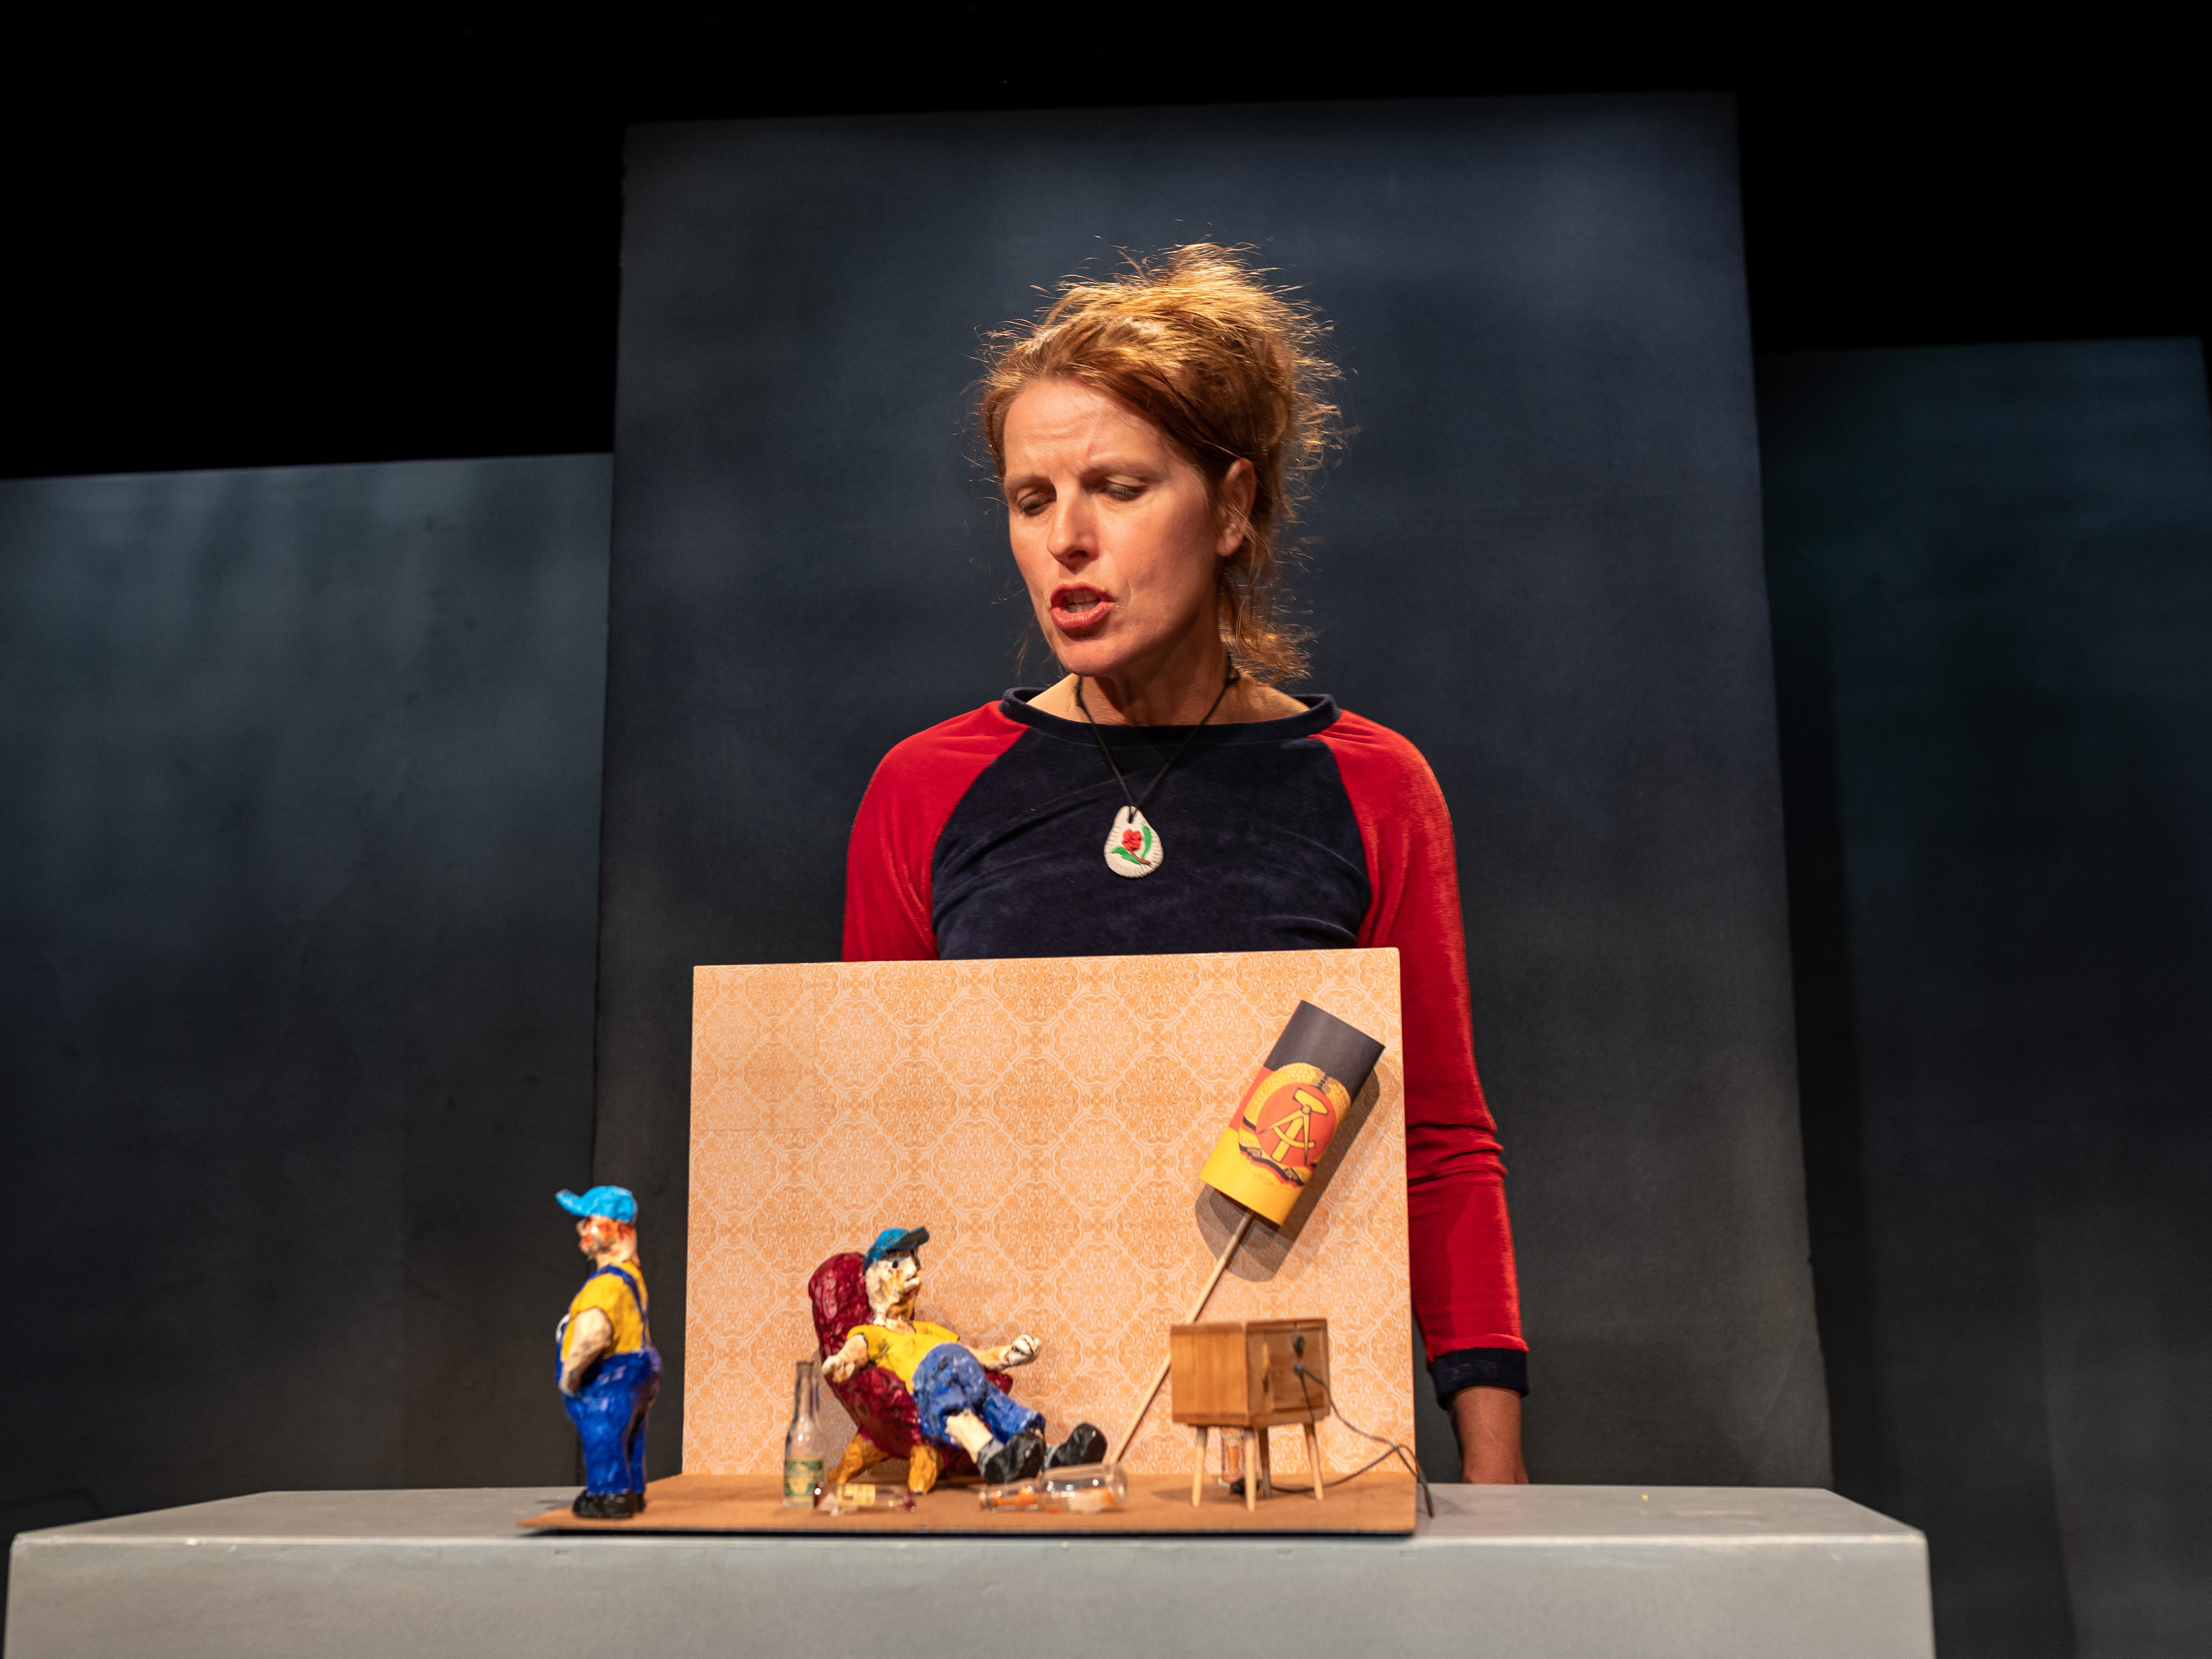 Puppeteer Annegret Geist stands behind the model of a living room. The figure of a man with a blue cap is sitting in the living room. He is watching television. Next to him is a lamp with a German flag. Turning away from the living room and the figure in the armchair is the figure of a little boy. He is also wearing a blue cap and blue pants.